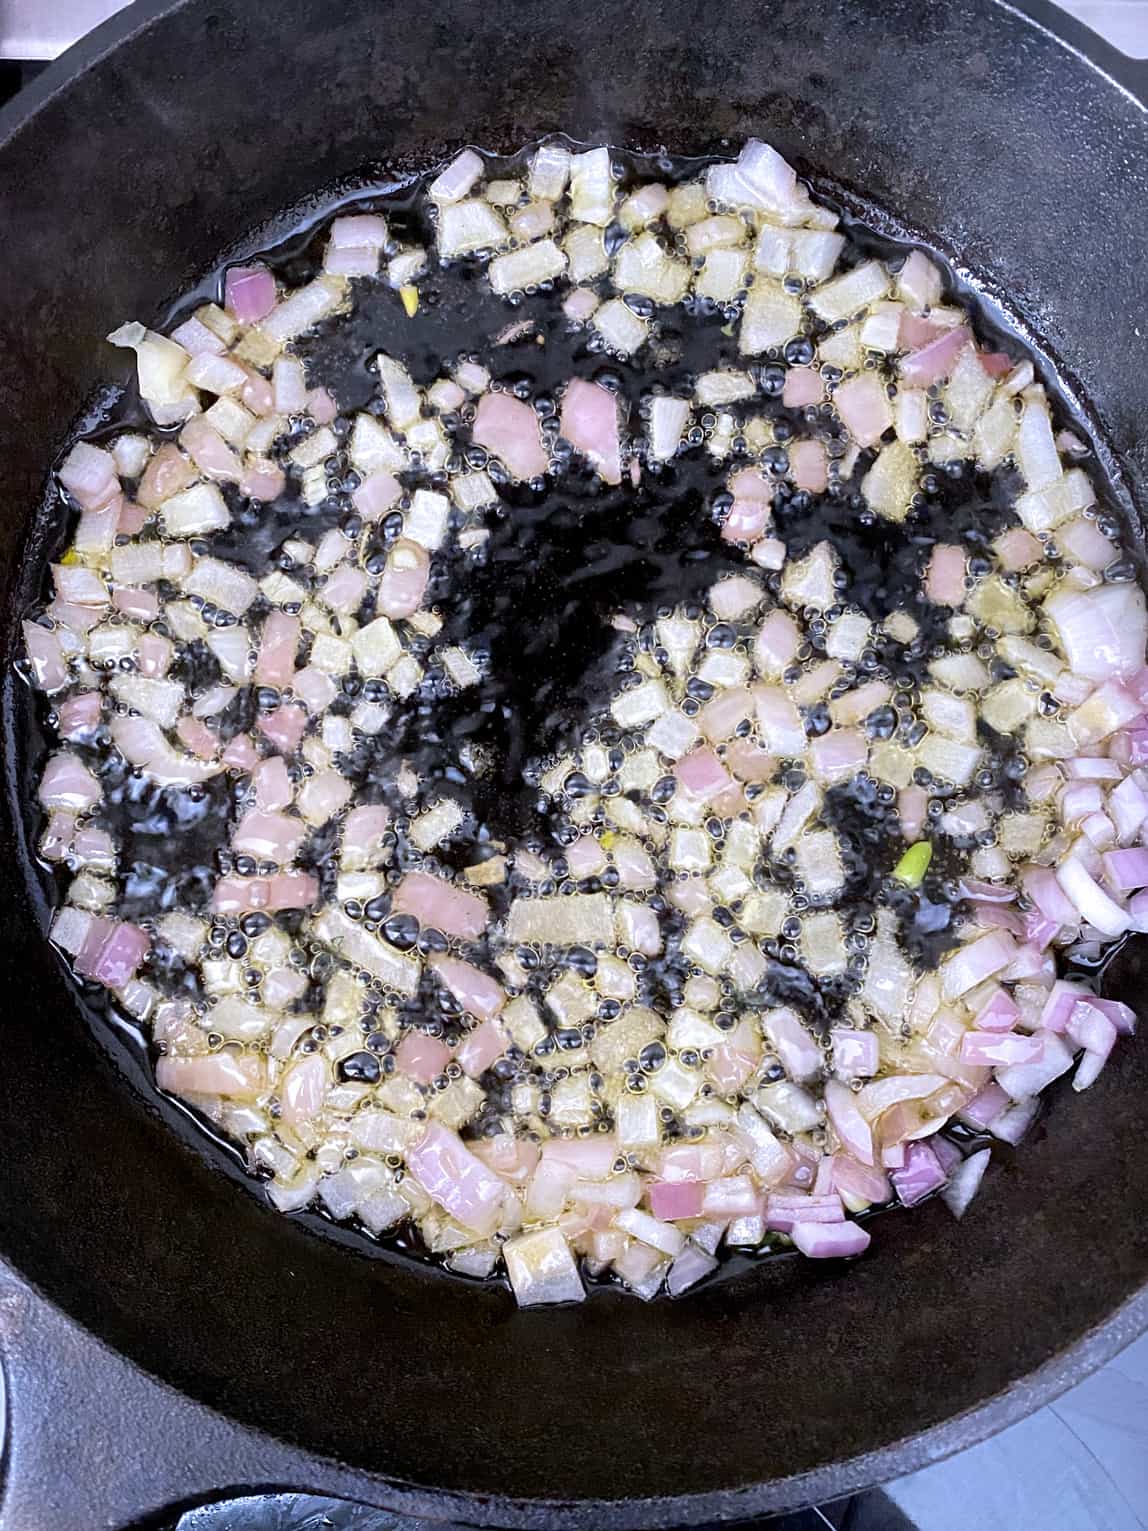 Onions sautéing in a skillet.